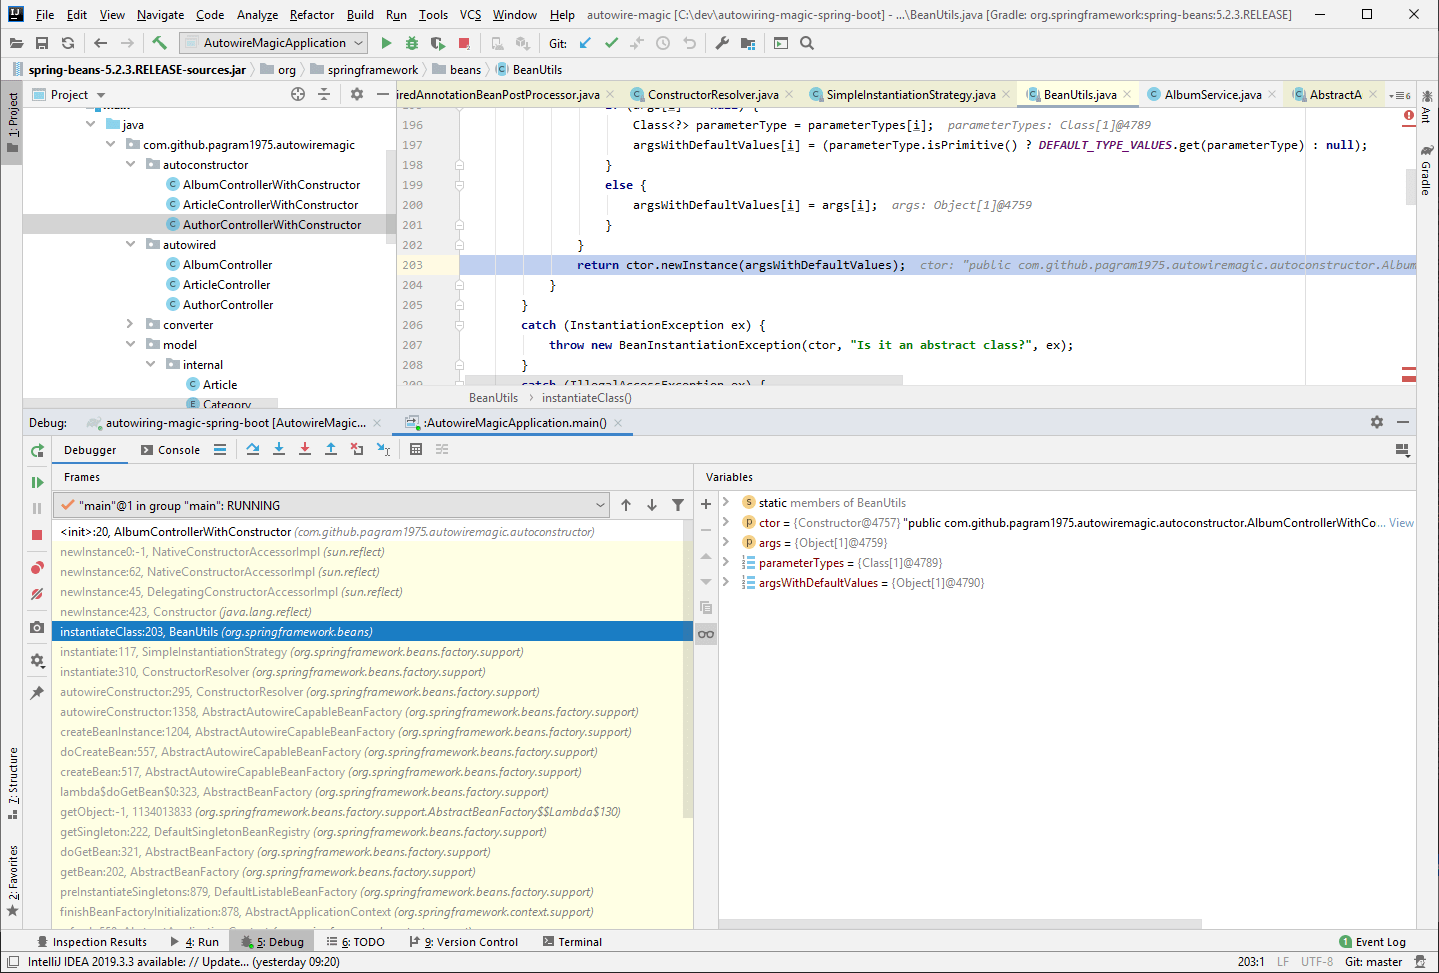 Debugging Spring in IntelliJ Idea shows the constructor is invoked via Java reflection